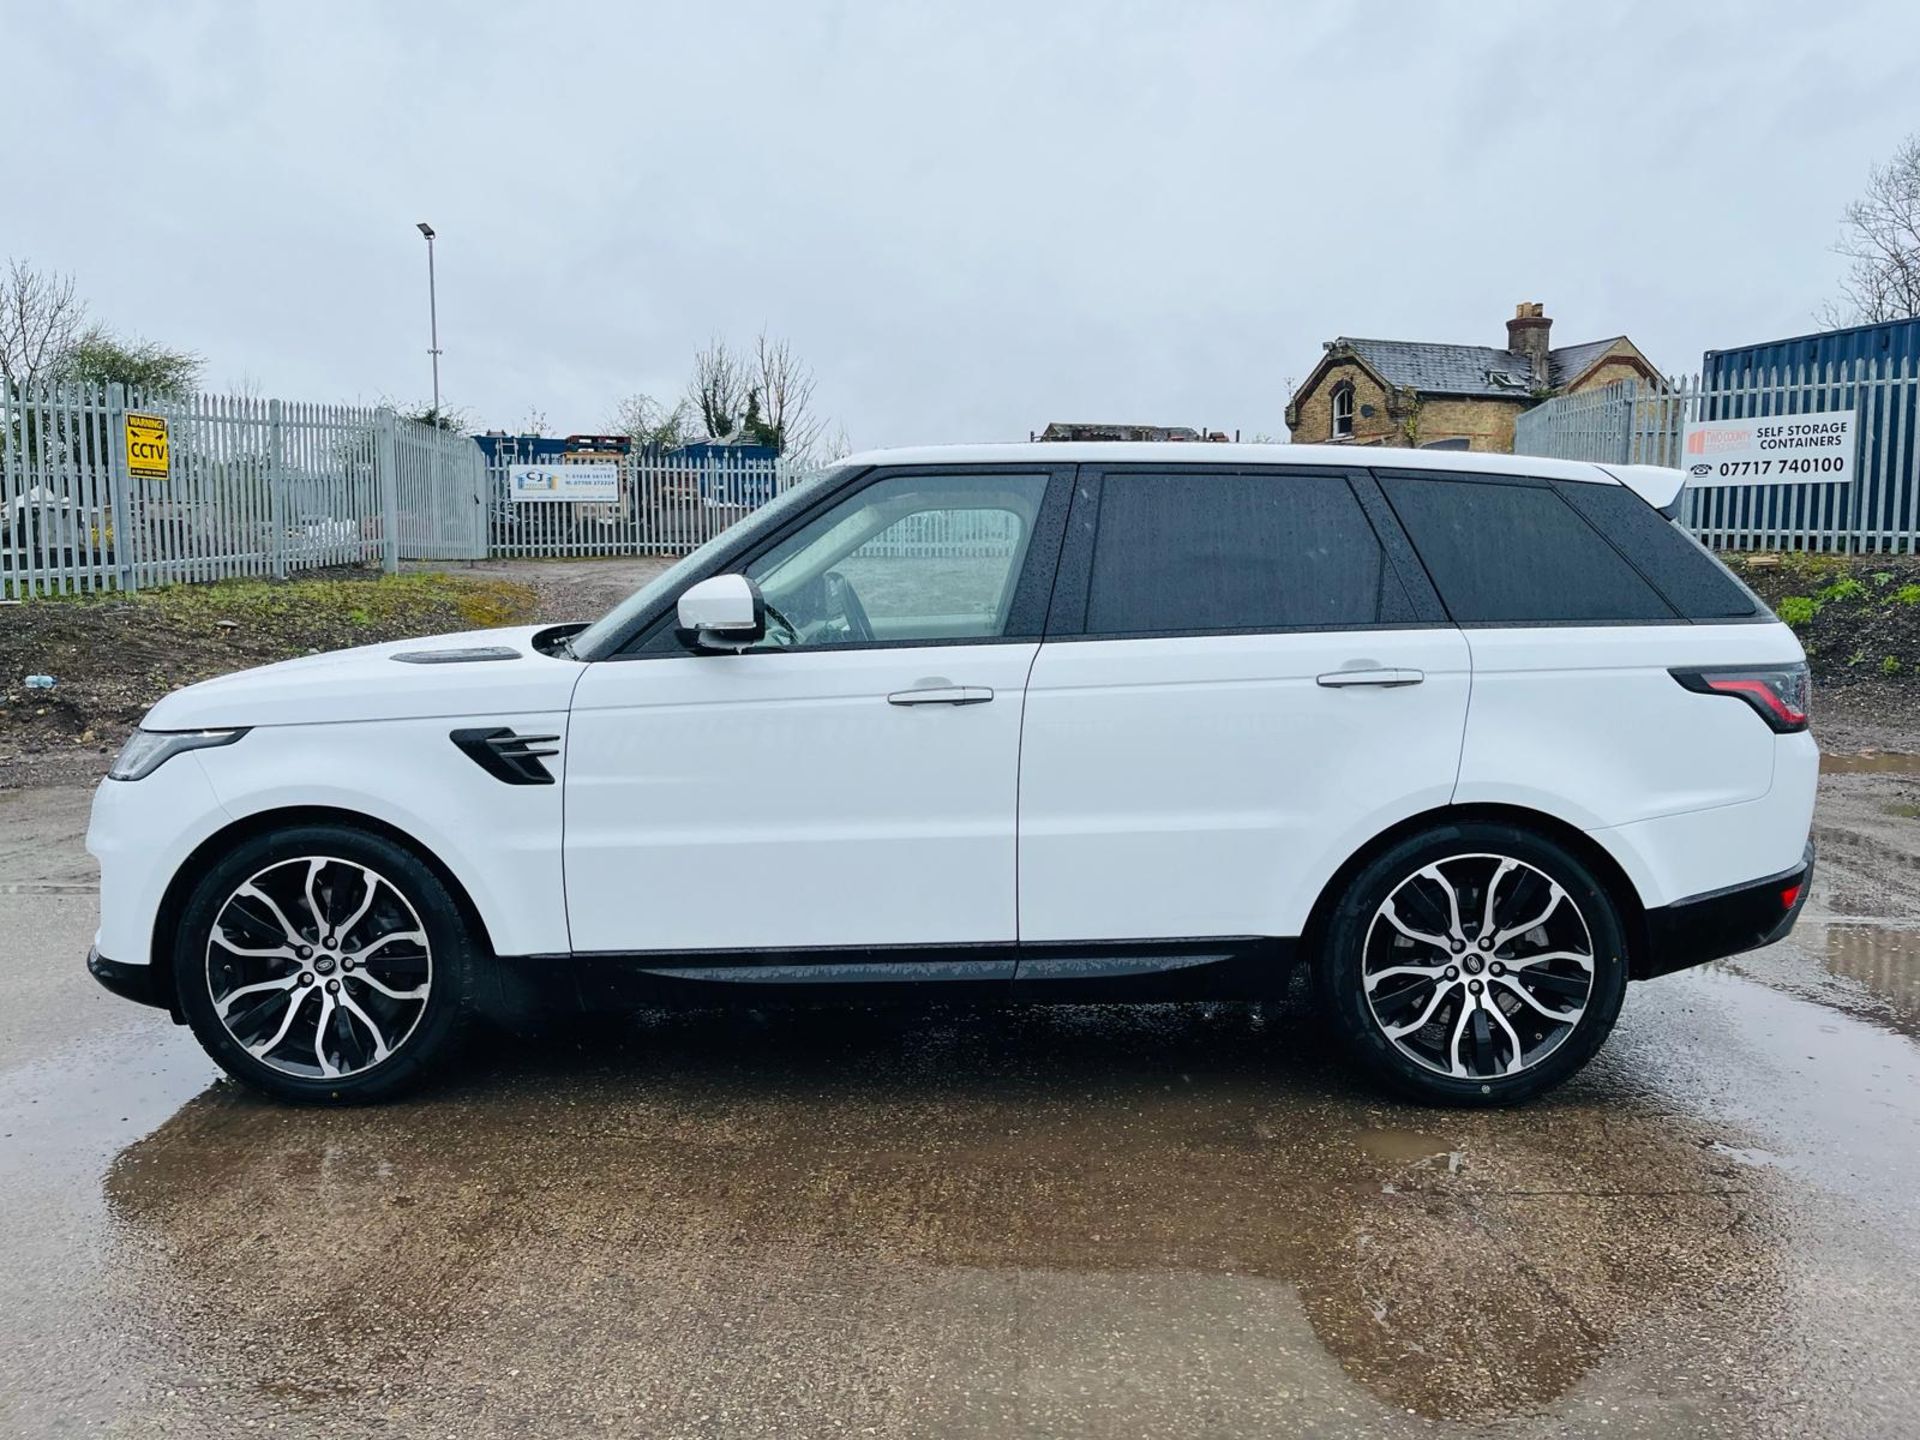 ** ON SALE ** Land Rover Range Rover Sport 2.0 P400E HSE Hybrid 2021 '21 Reg' -Panoramic Roof- - Image 4 of 38